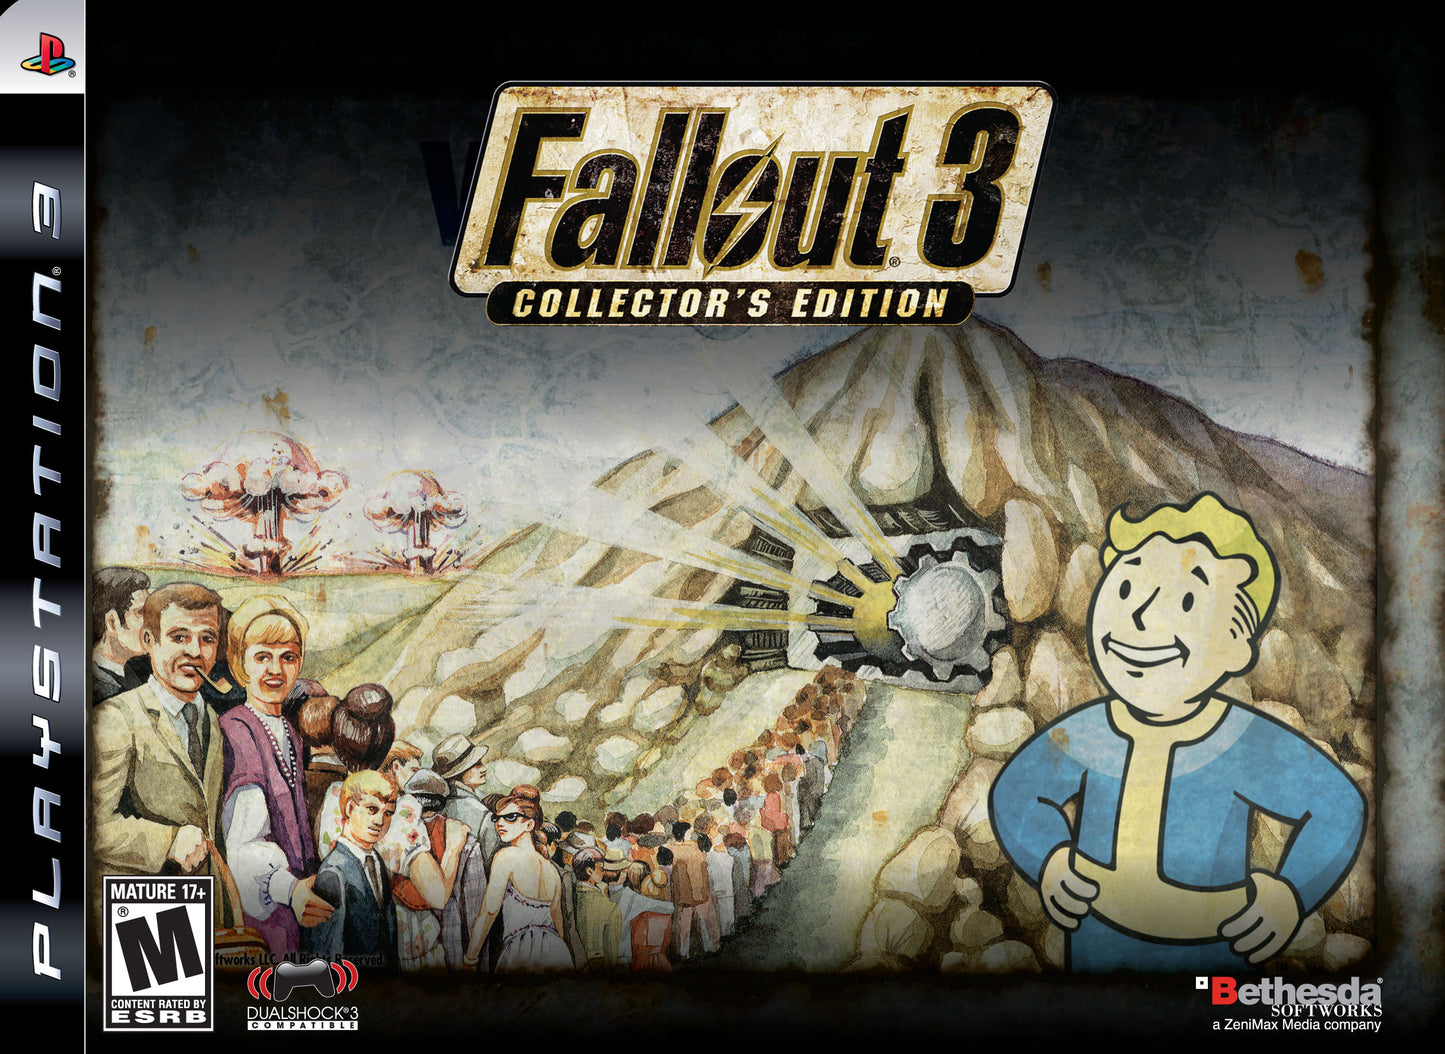 Fallout 3: Collector's Edition (Playstation 3)